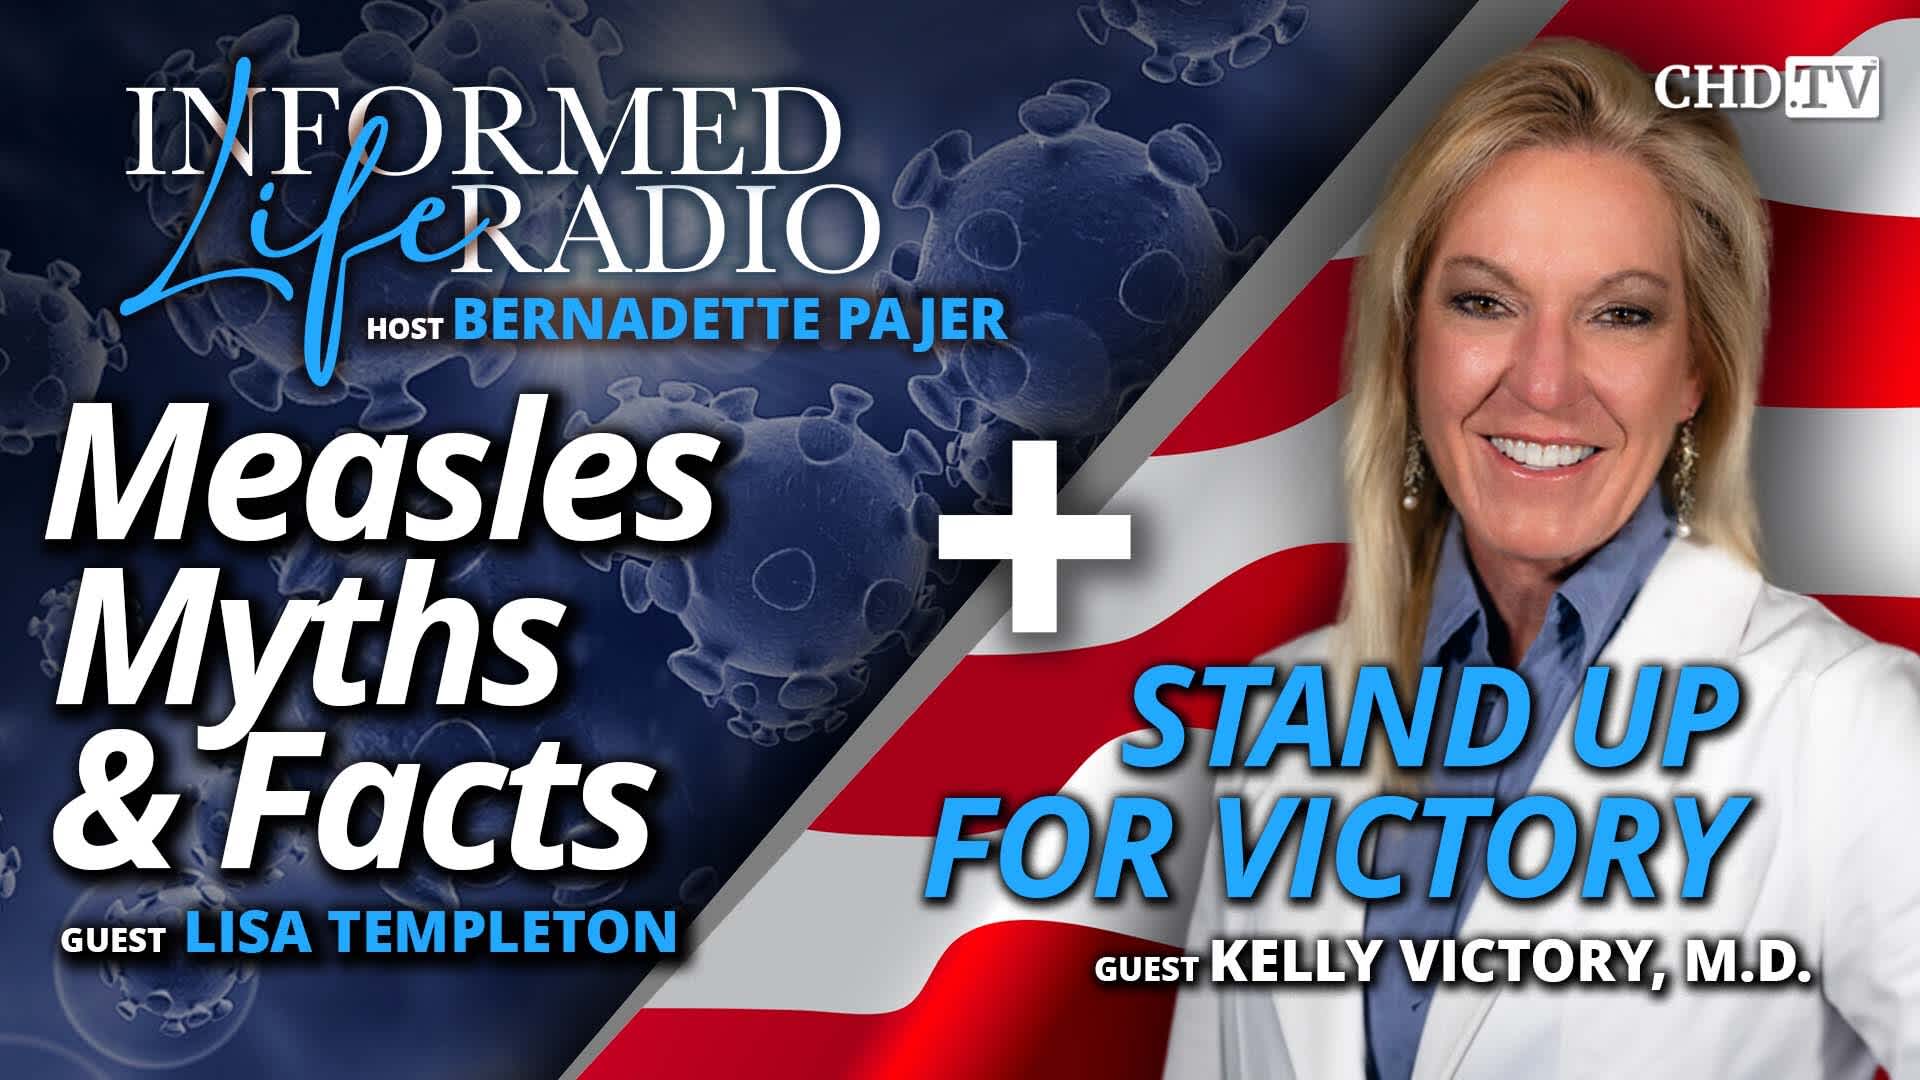 Measles Myths & Facts + Stand up for Victory